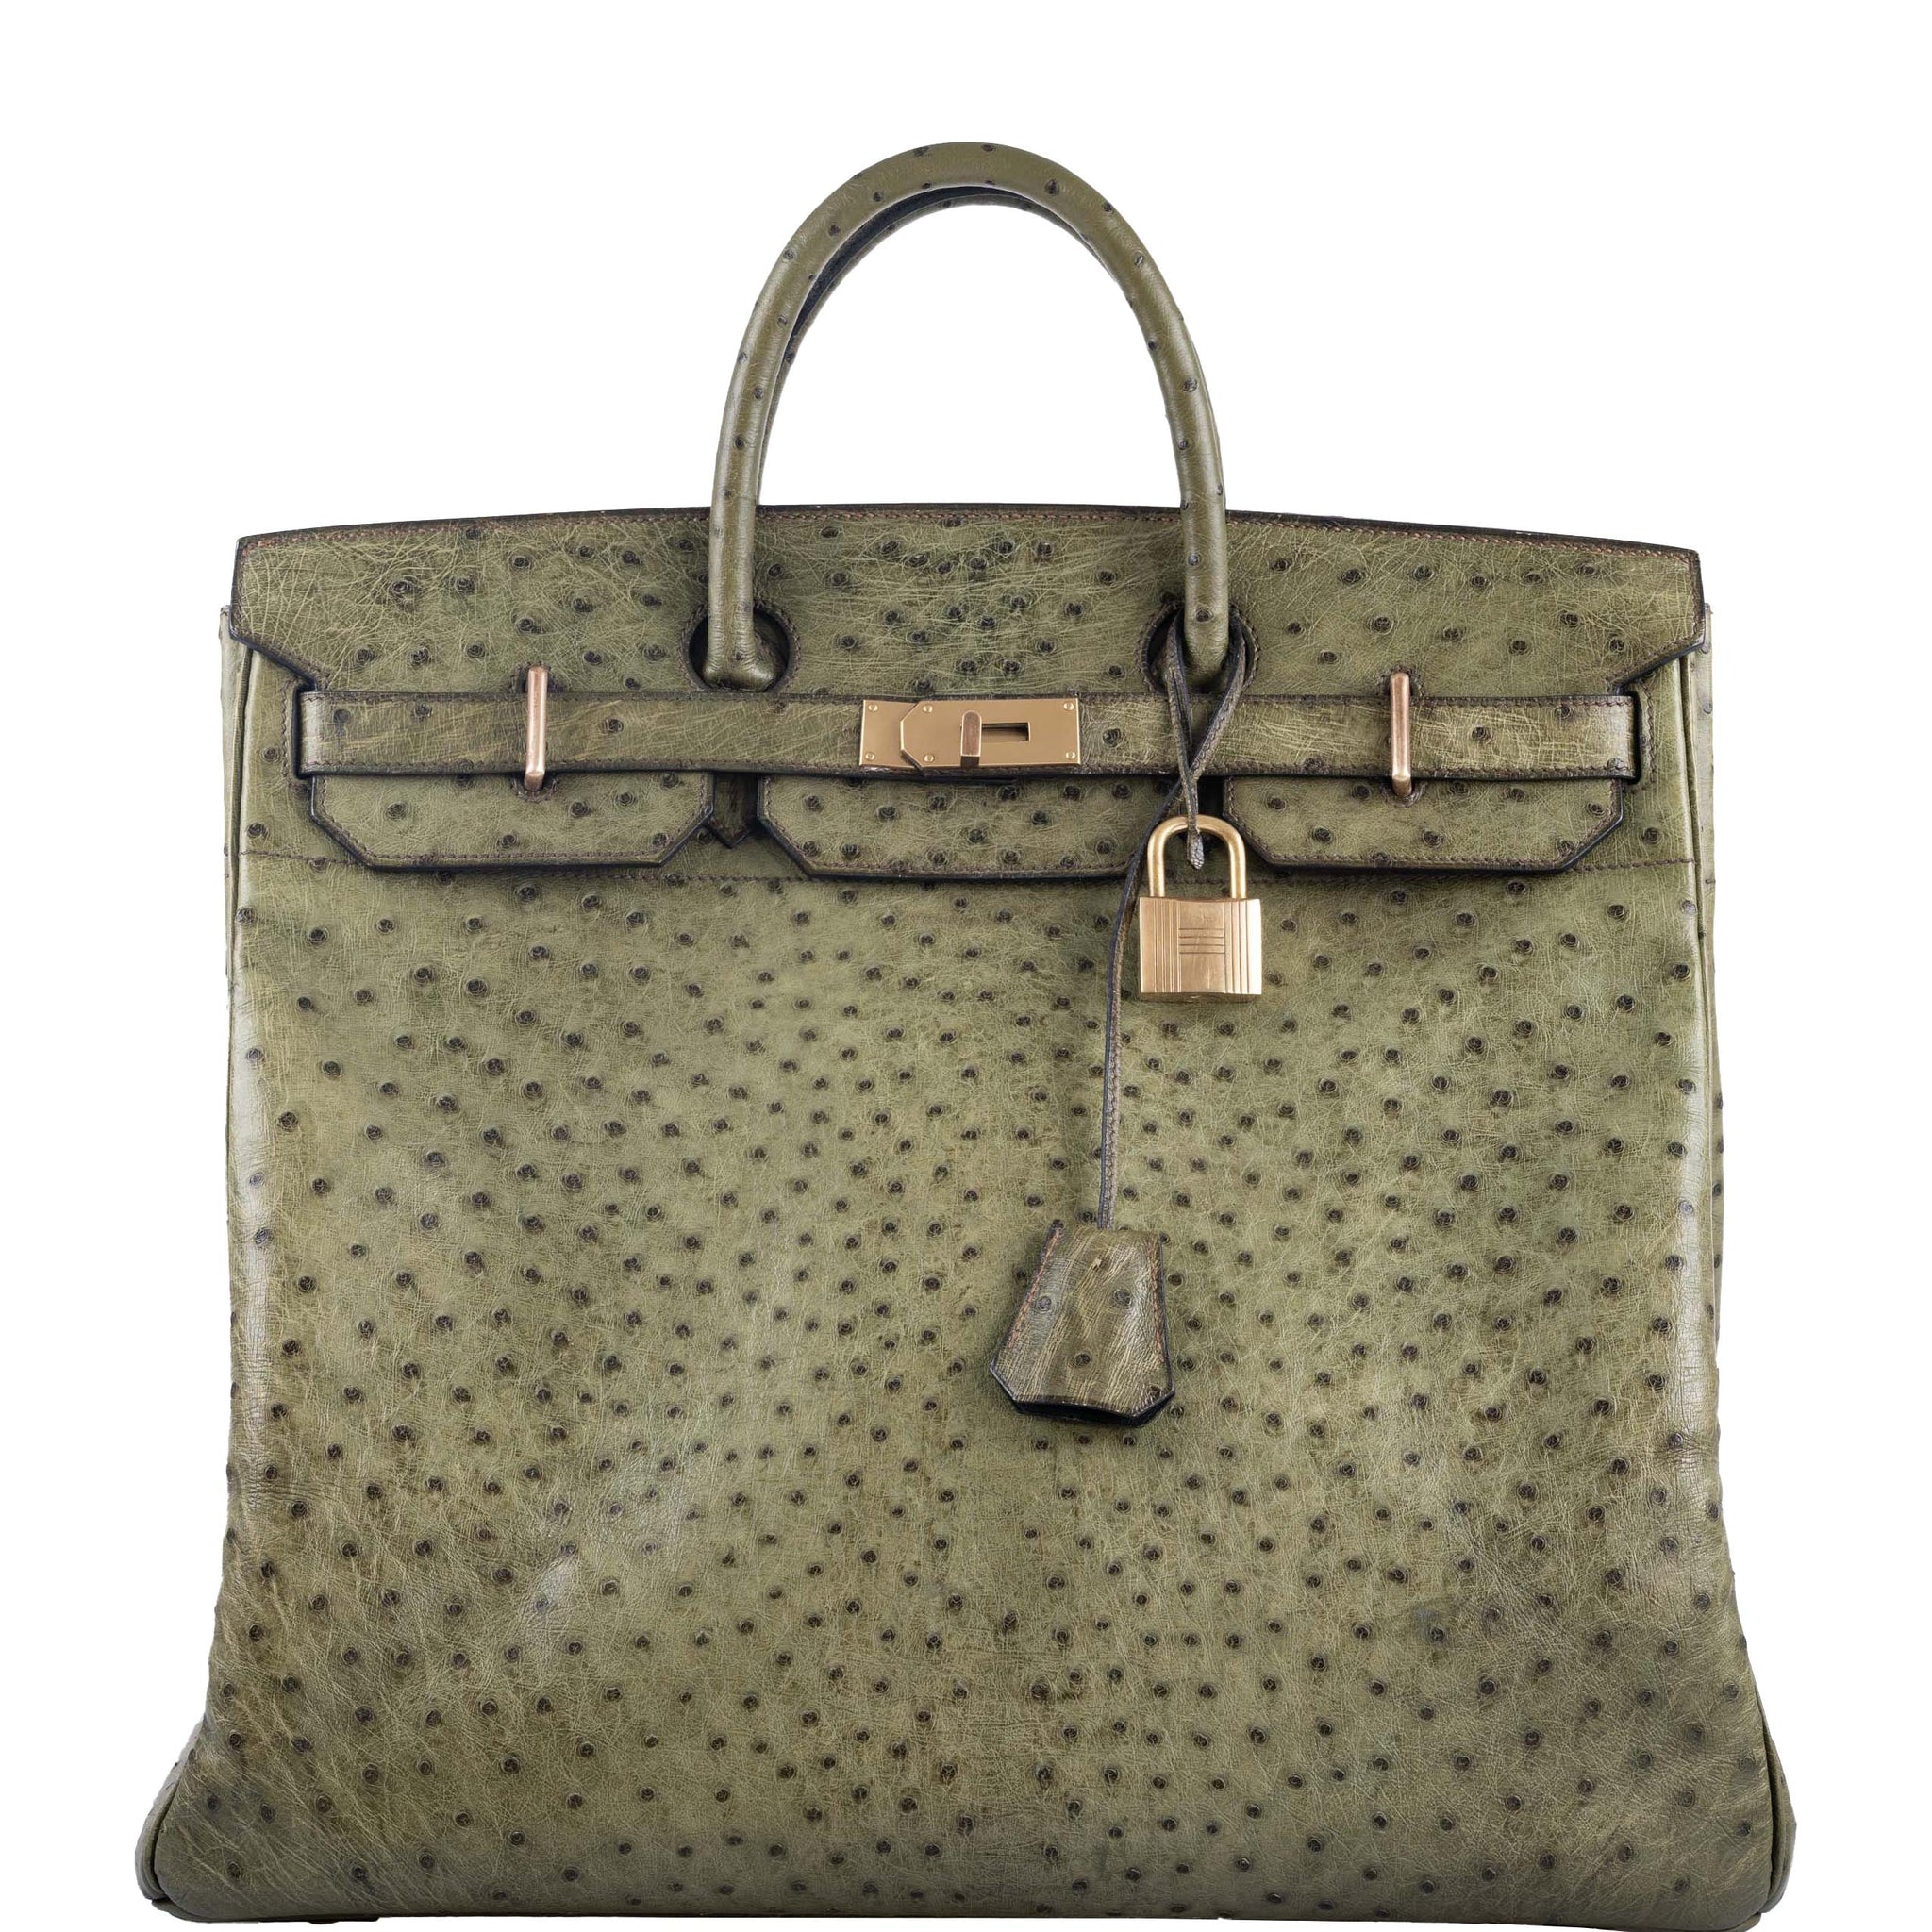 Pre-Owned Hermes HAC Travel 55 Ardennes 55 Green 